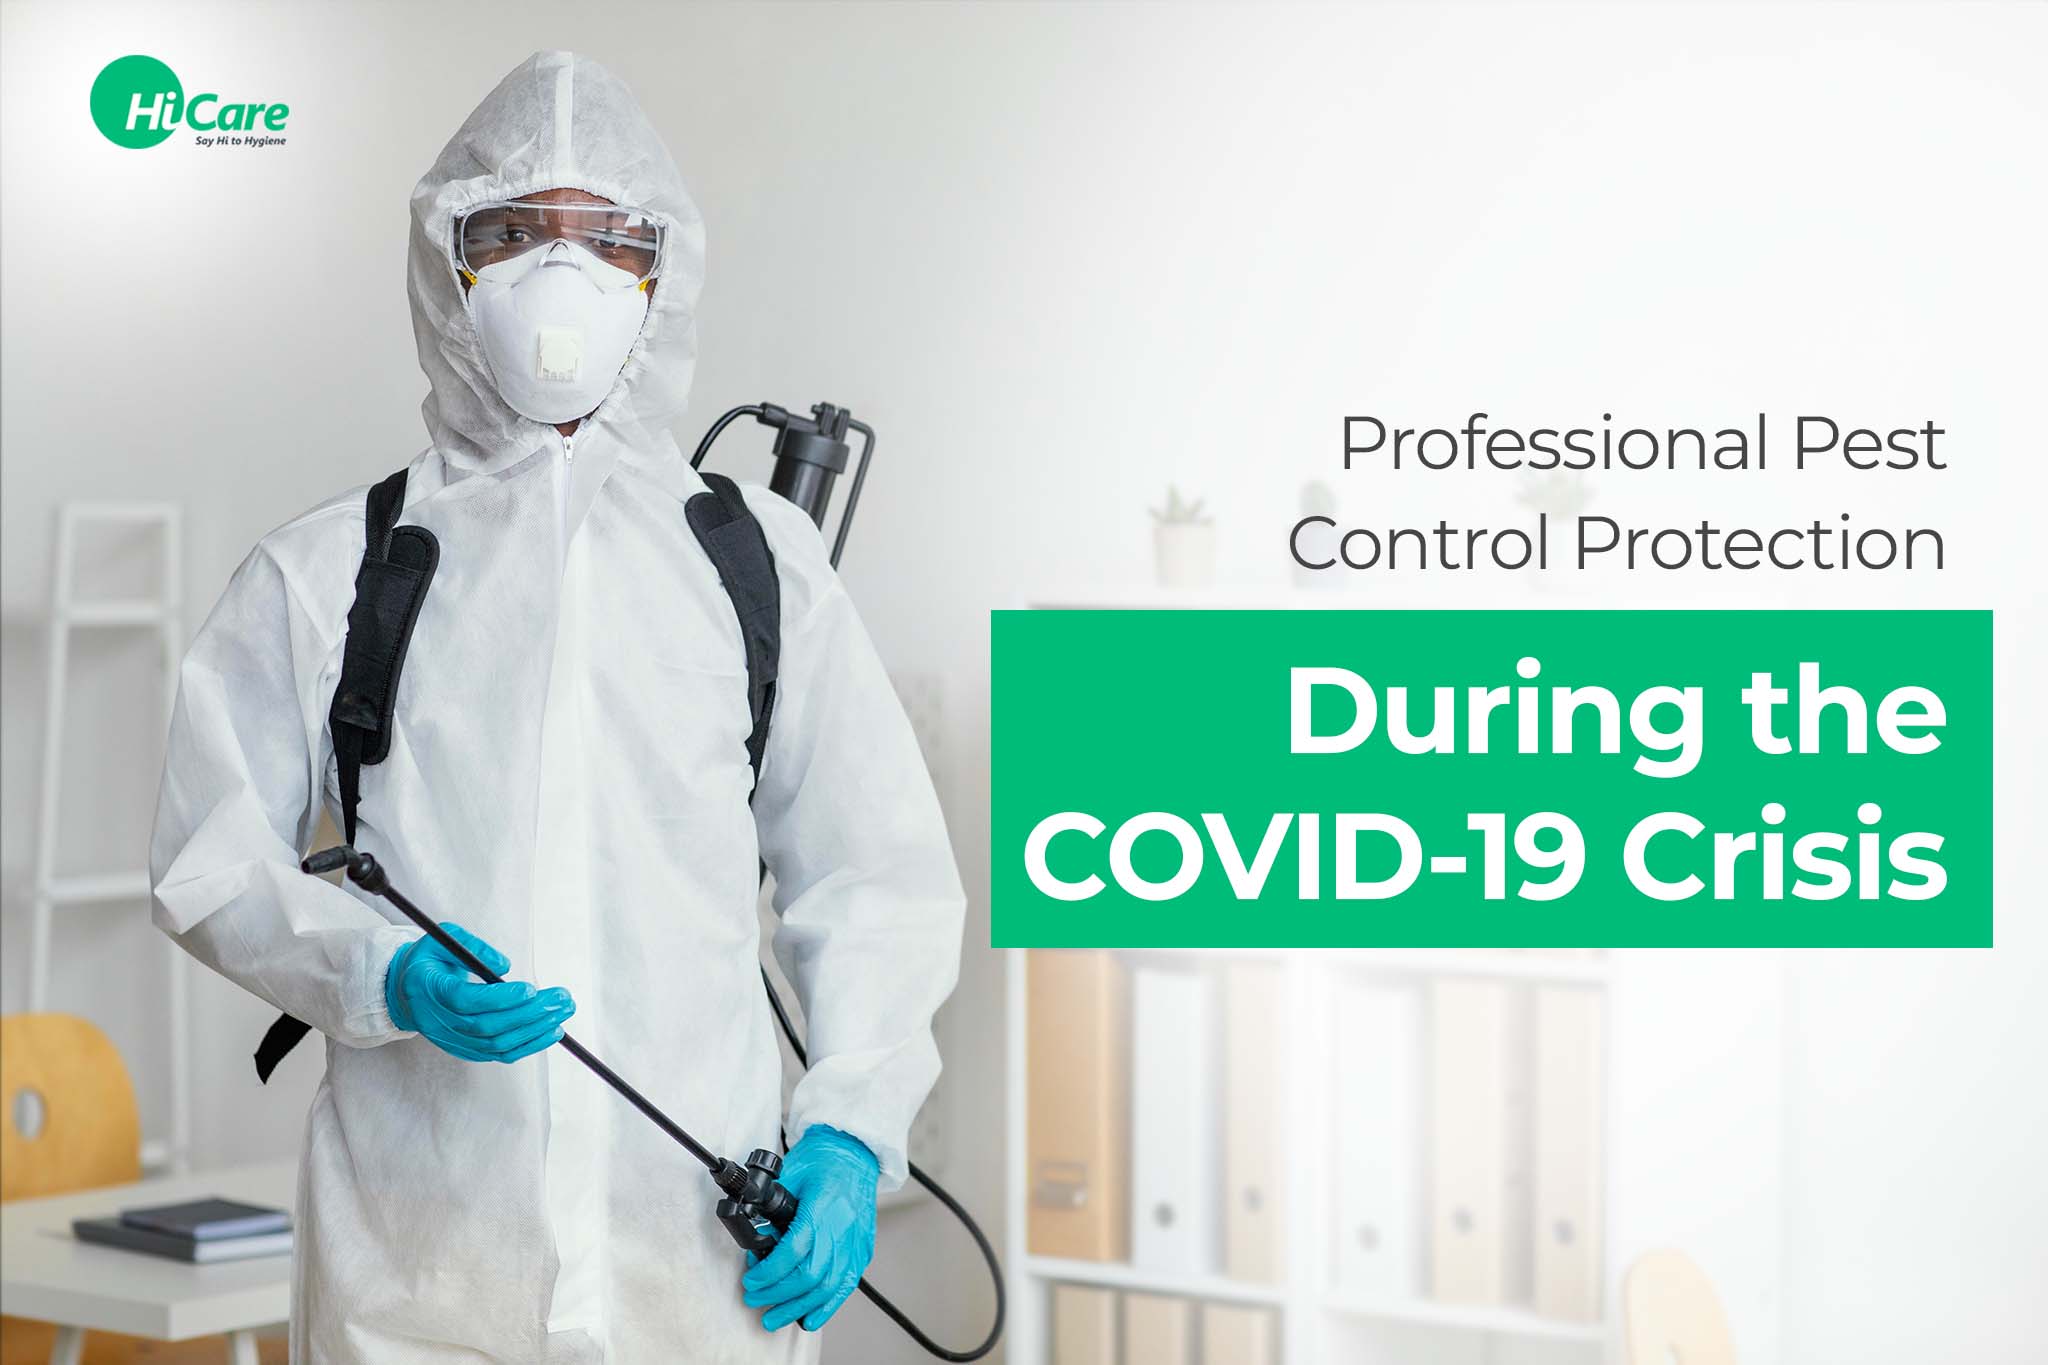 professional pest control protection during the covid-19 crisis